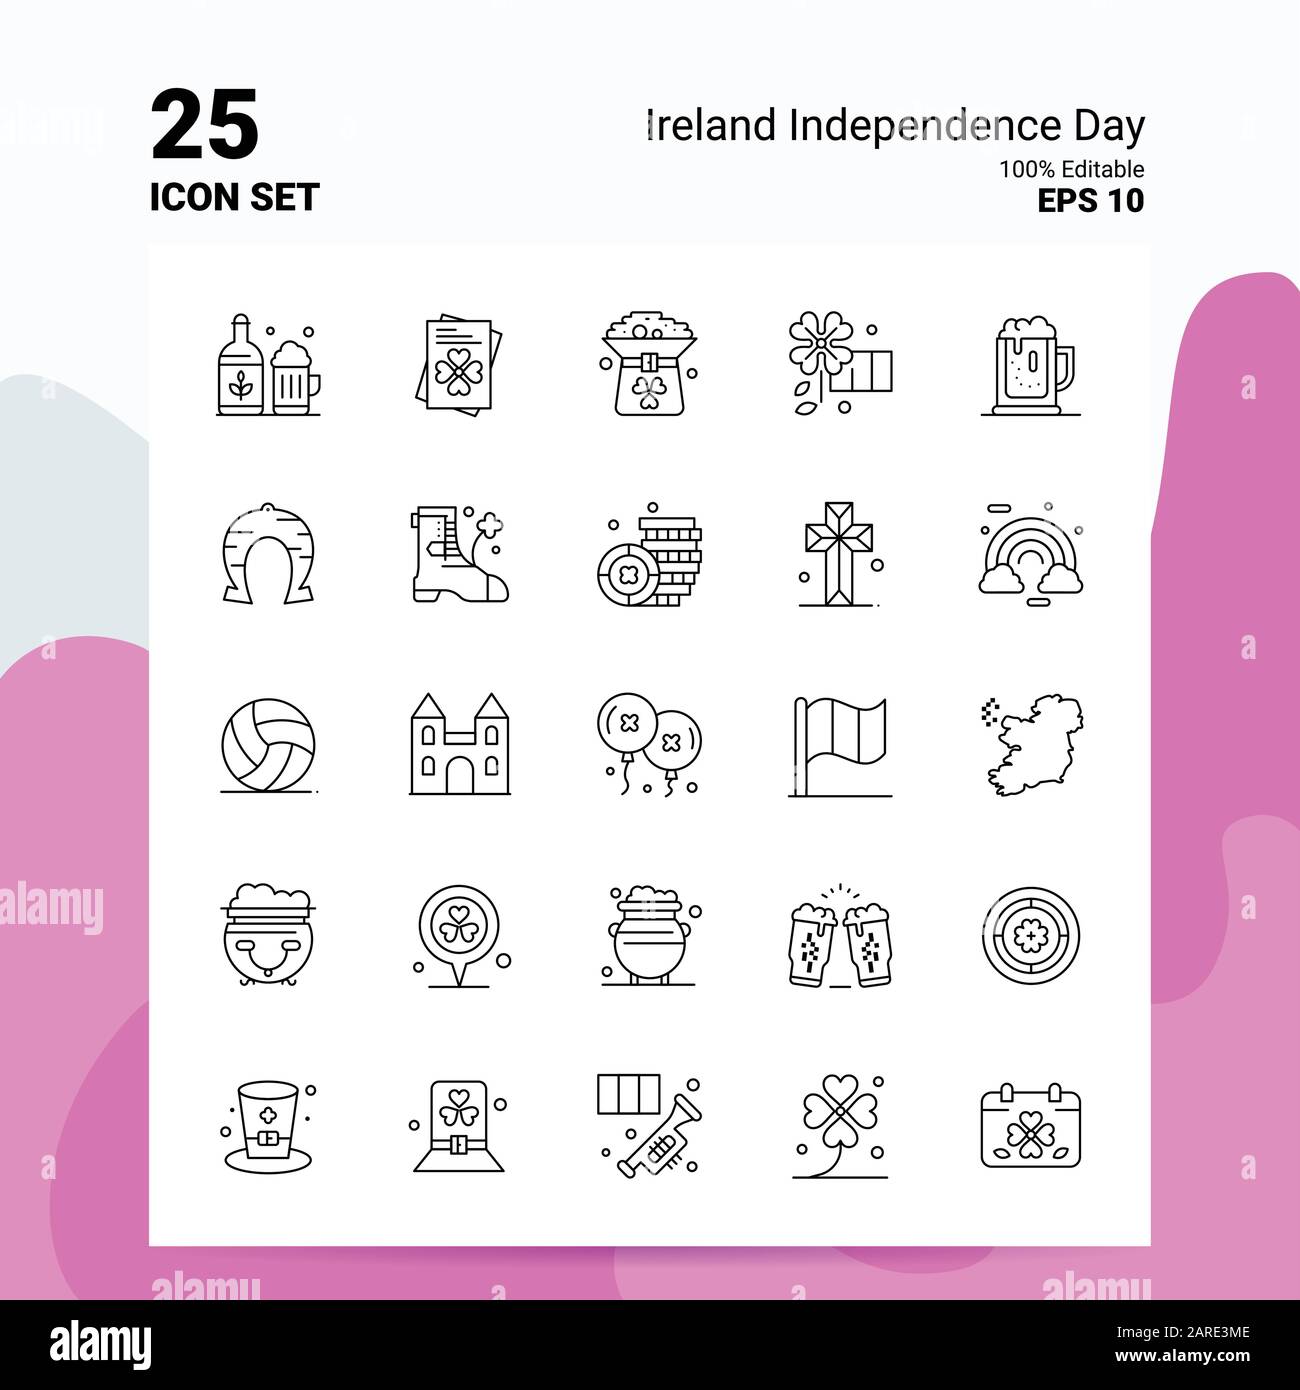 25 Ireland Independence Day Icon Set. 100% Editable EPS 10 Files. Business Logo Concept Ideas Line icon design Stock Vector